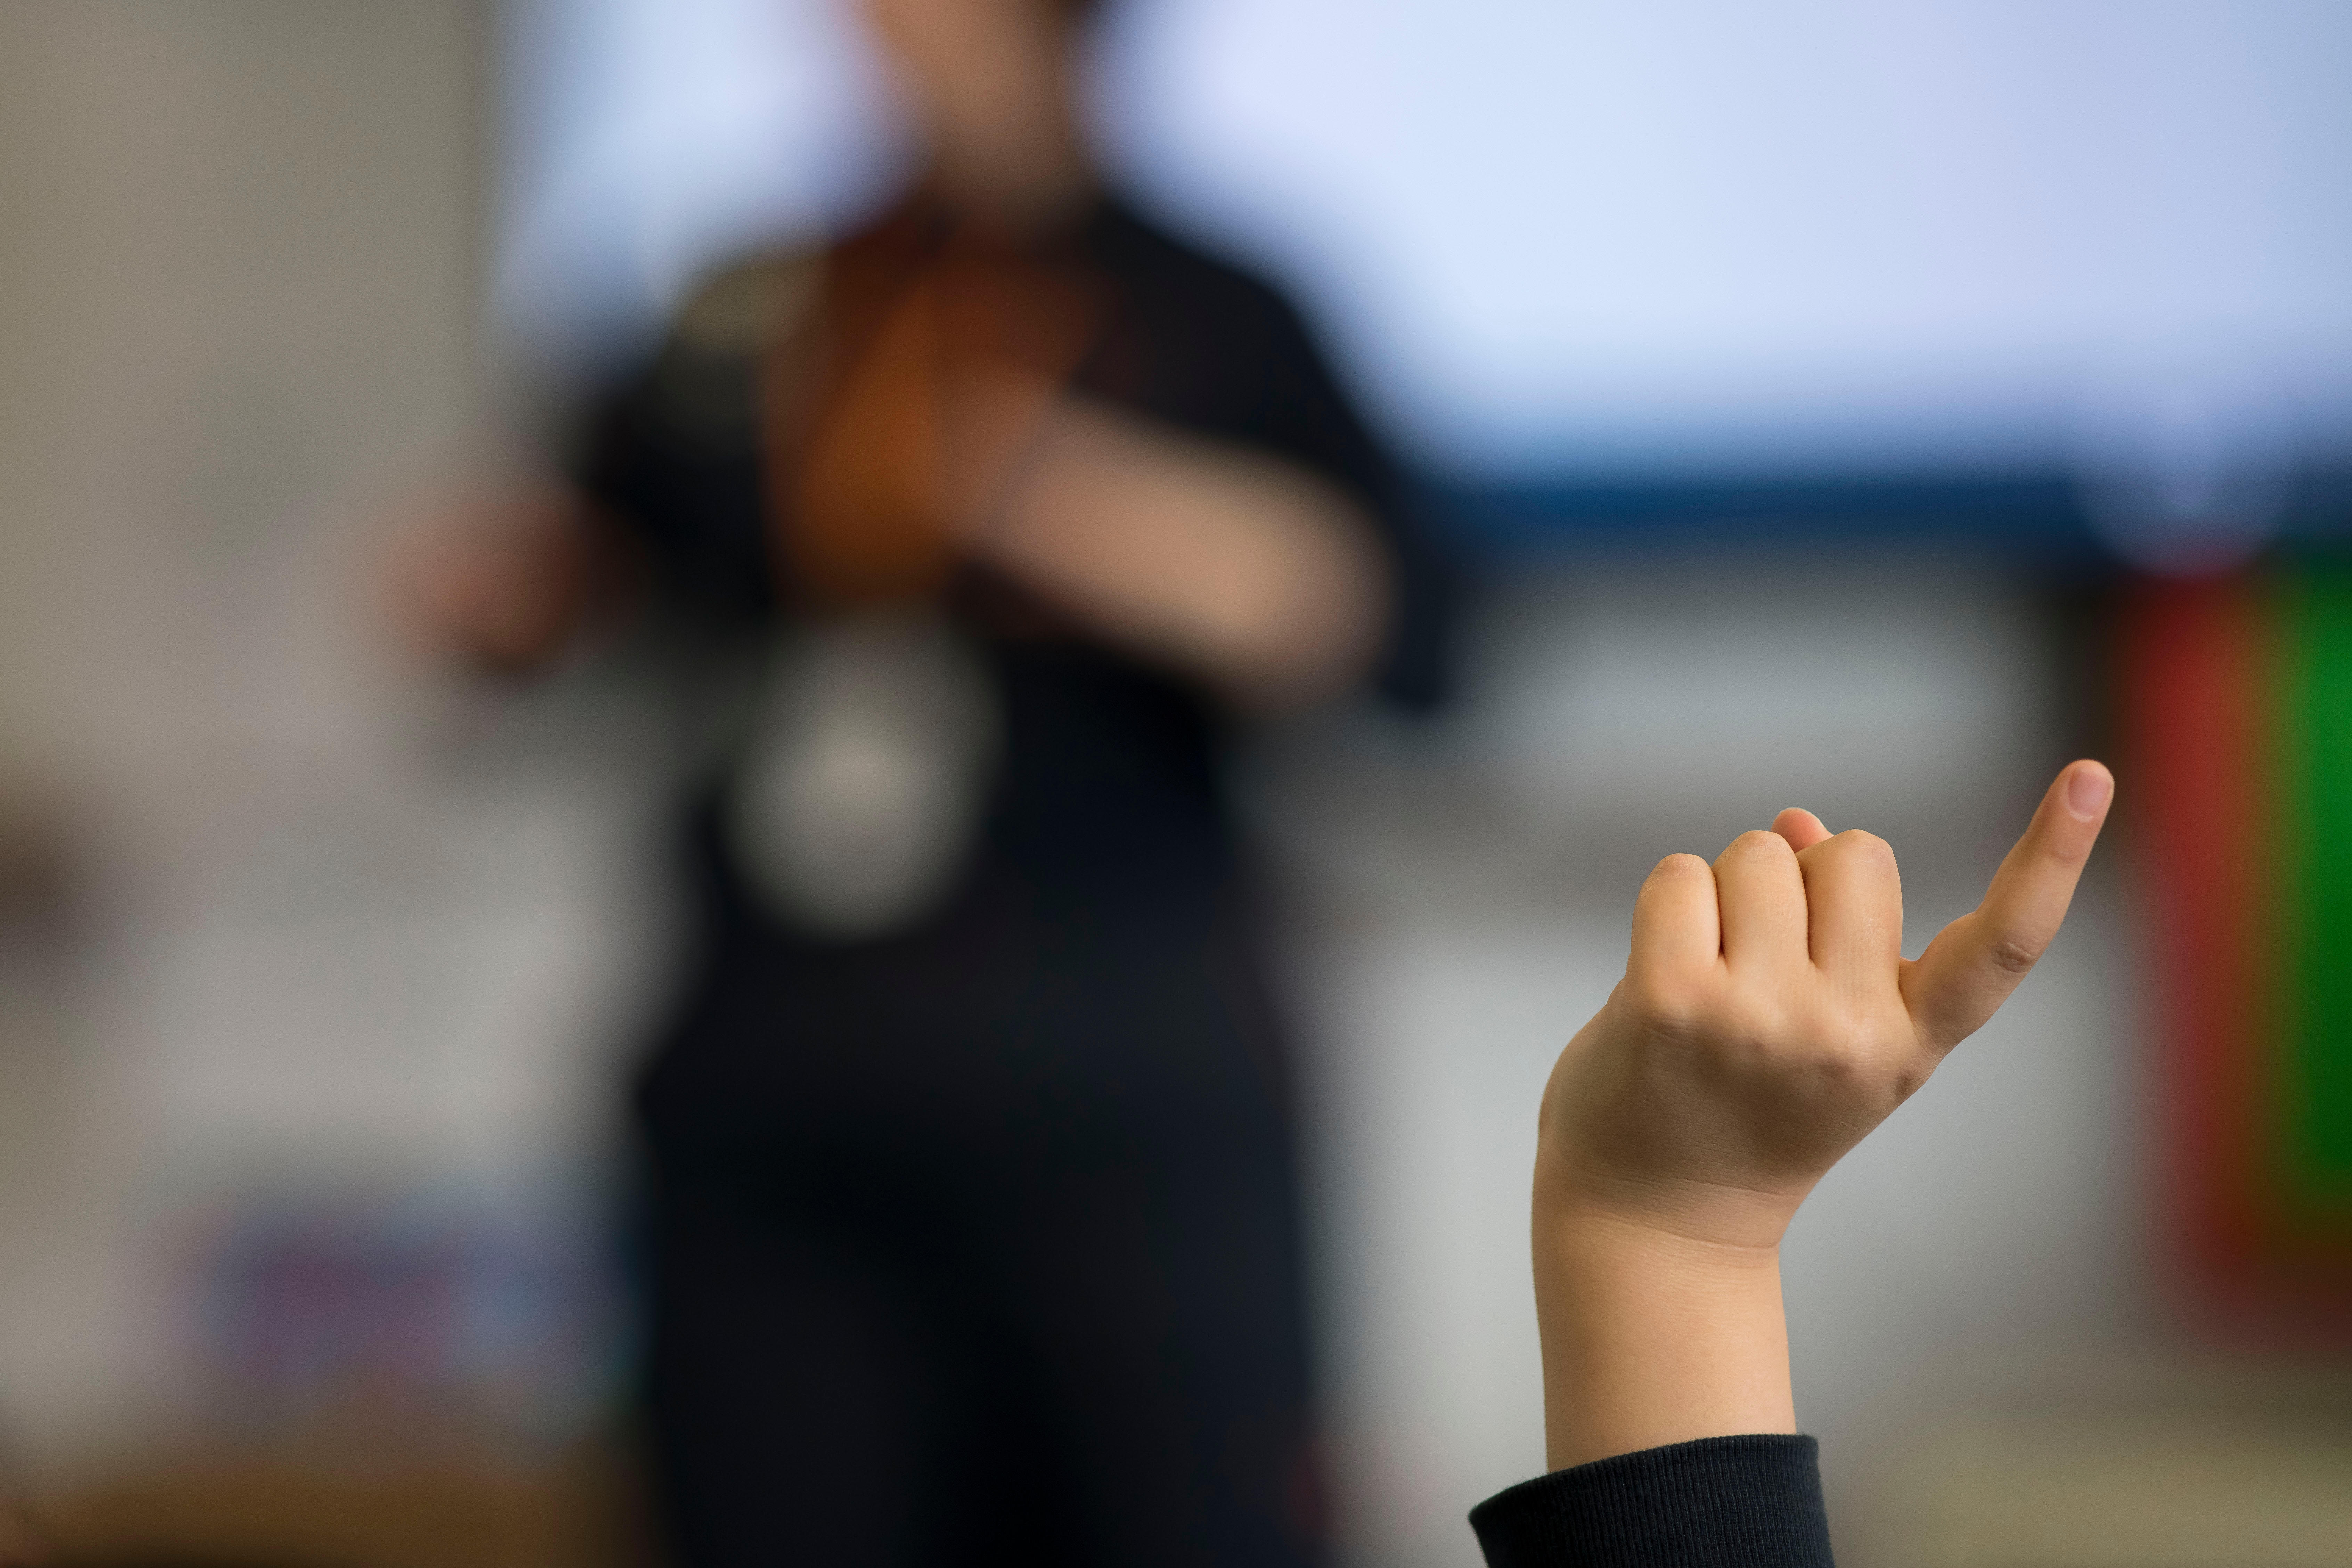 A young child puts his hand up when asked a question in a school classroom in Wales, UK